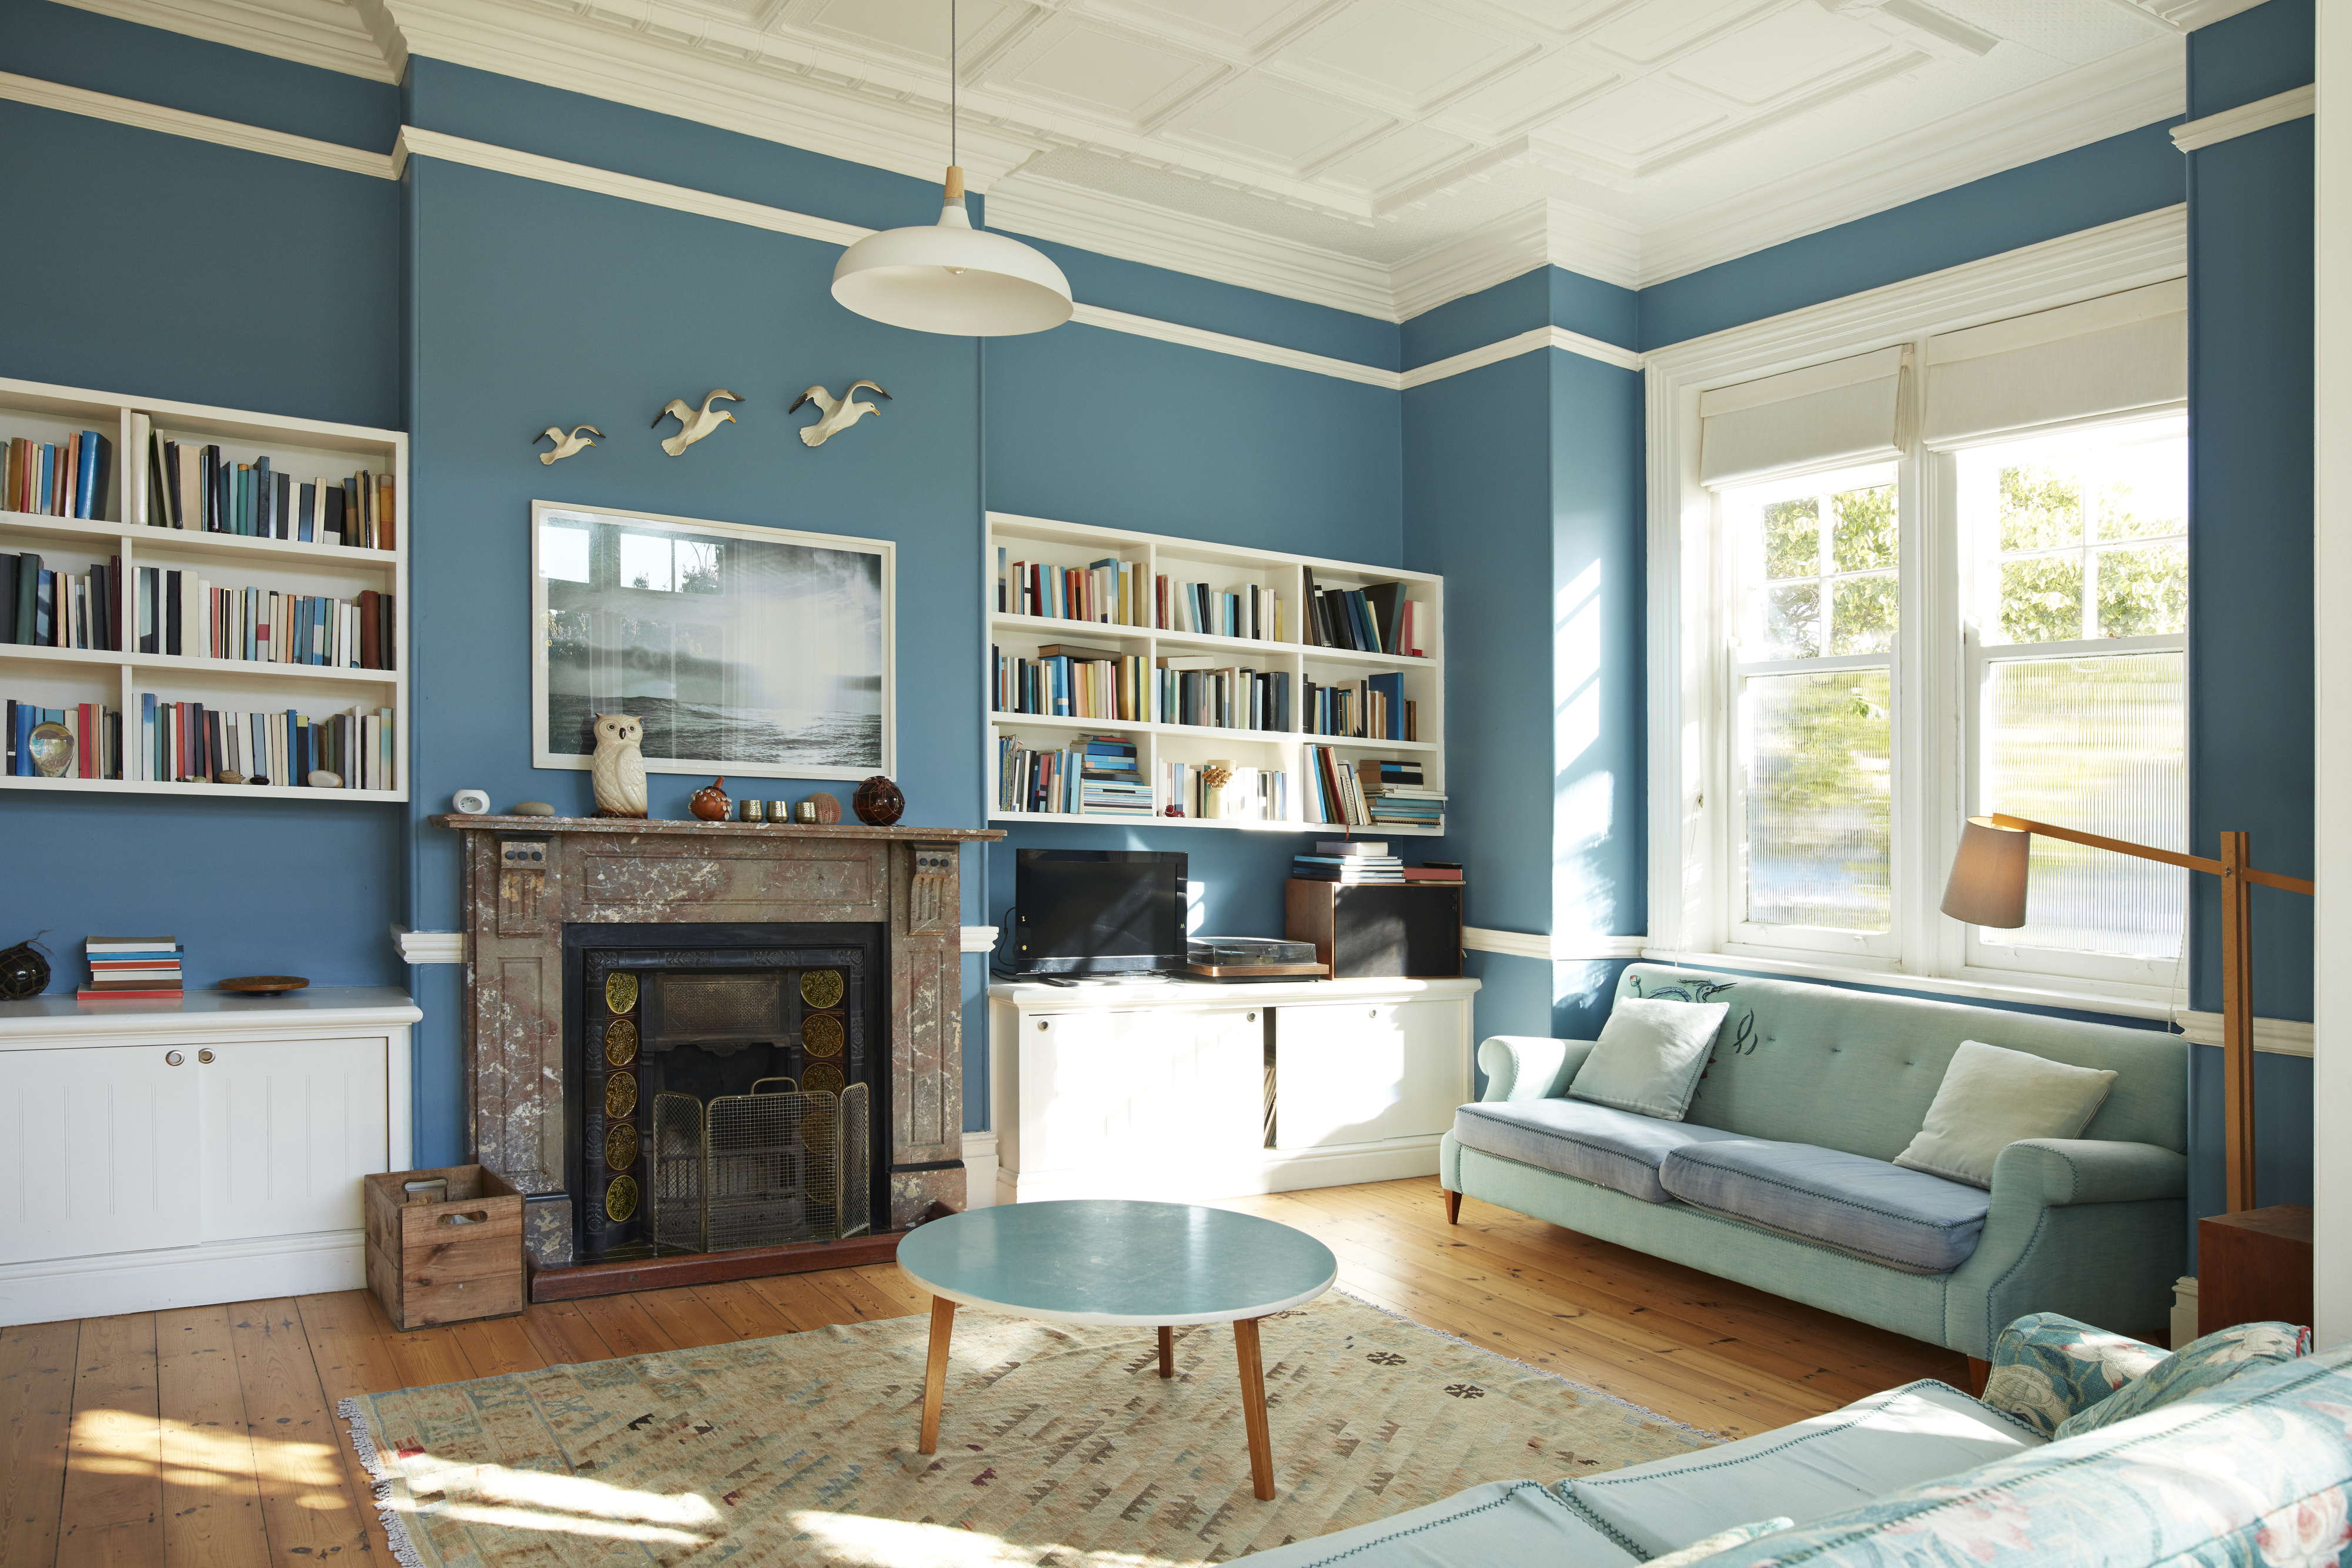 A living room with blue walls, matching furniture, a fireplace, and natural light